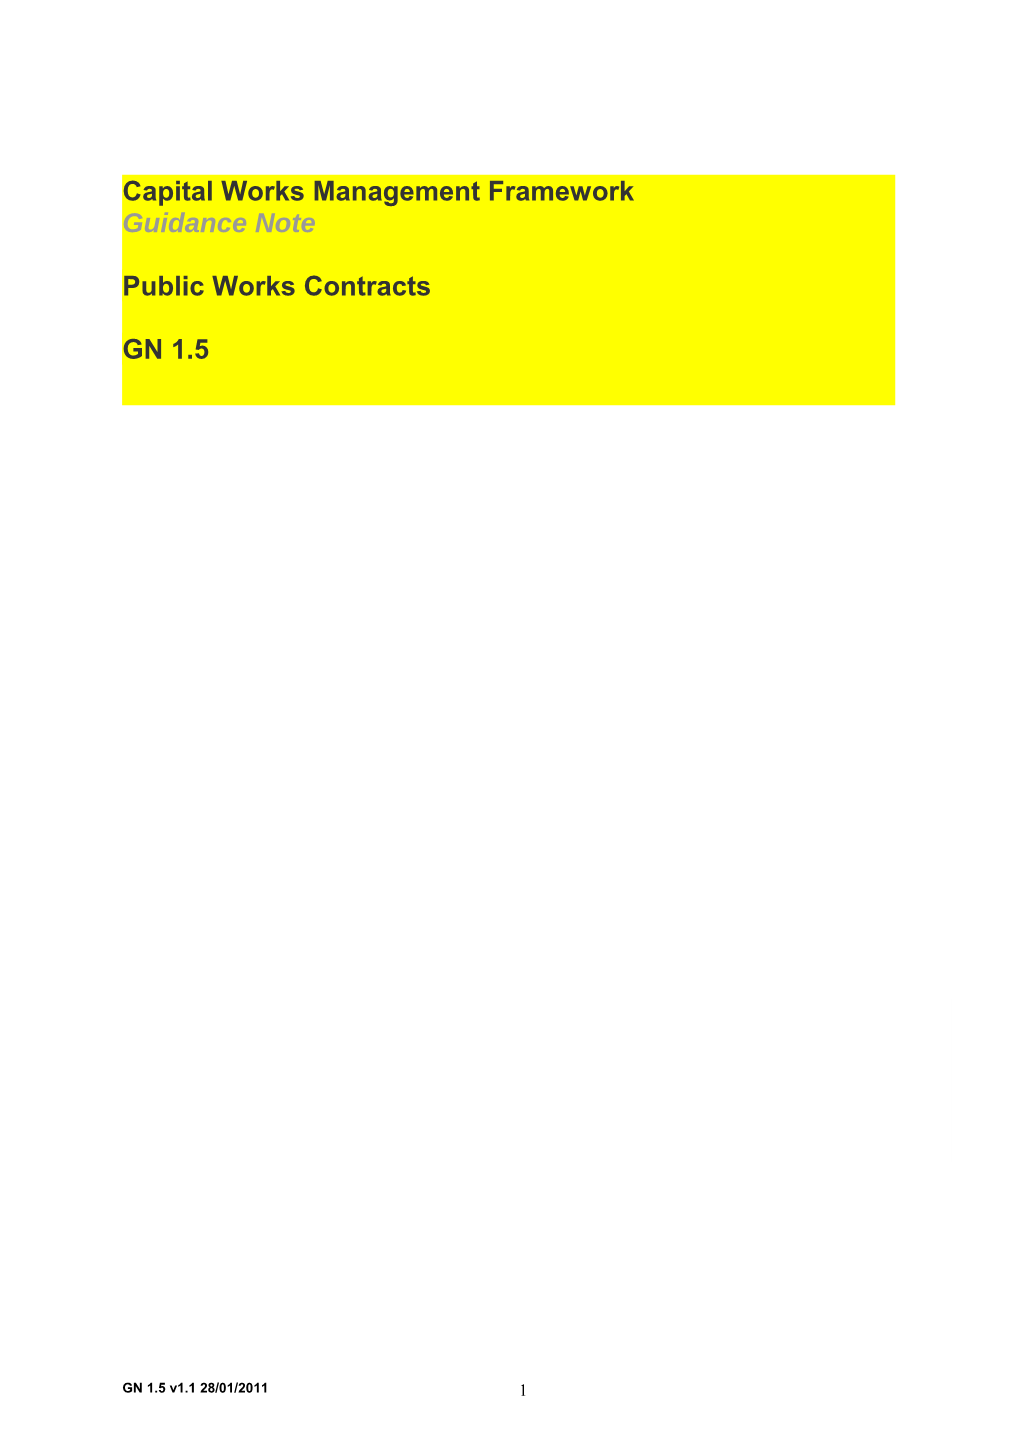 Public Works Contracts Guidance Notes